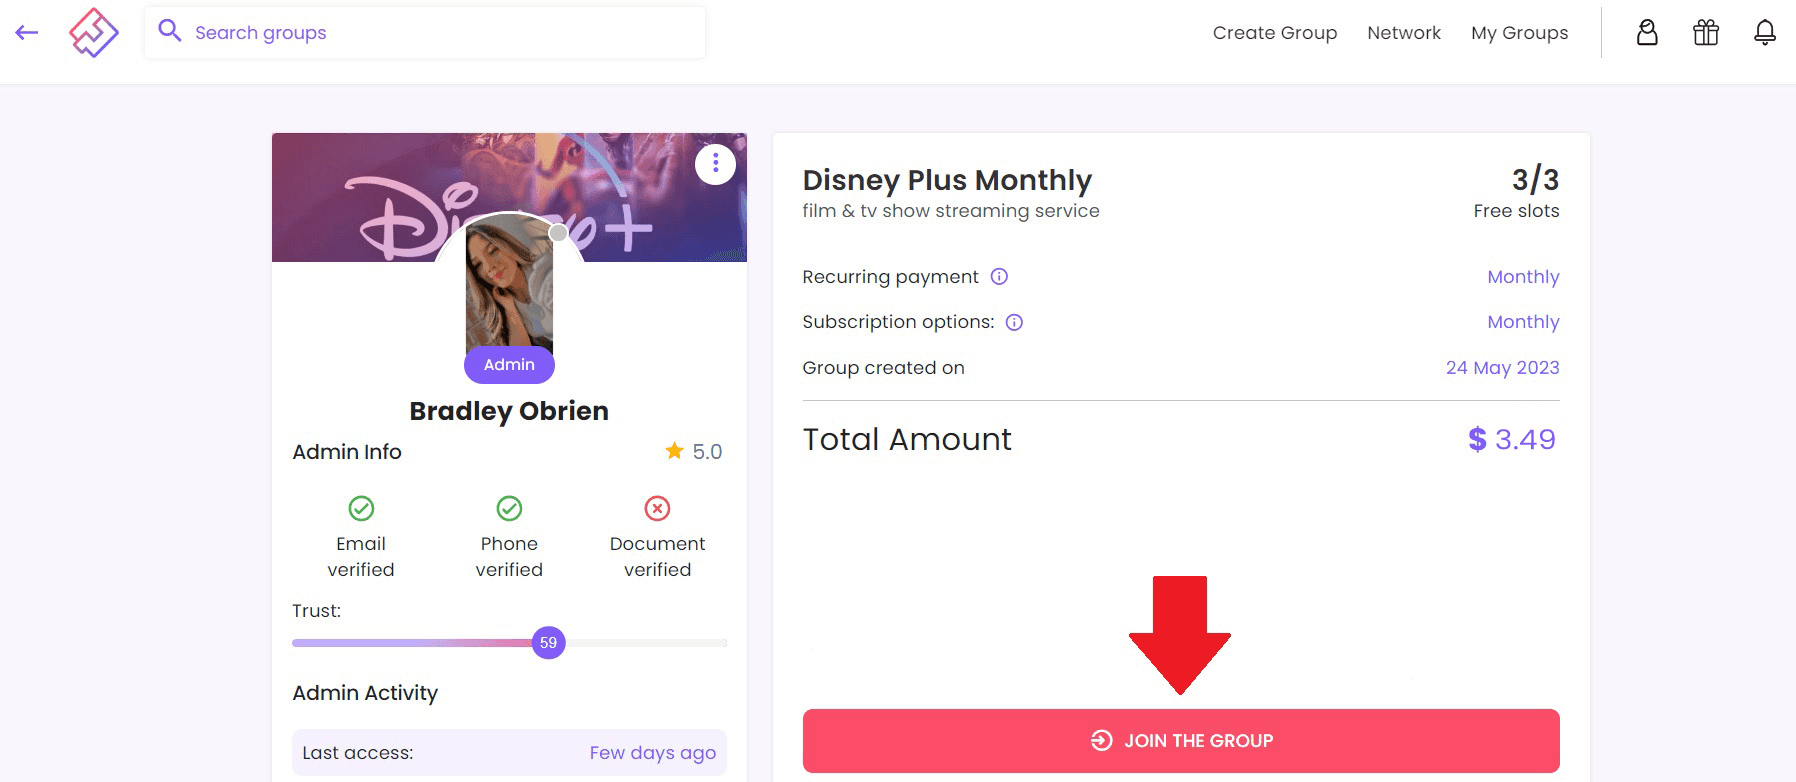 Become a Joiner on Together Price and share someone else's subscription to enjoy all the benefits of Disney Plus at a fraction of the price.